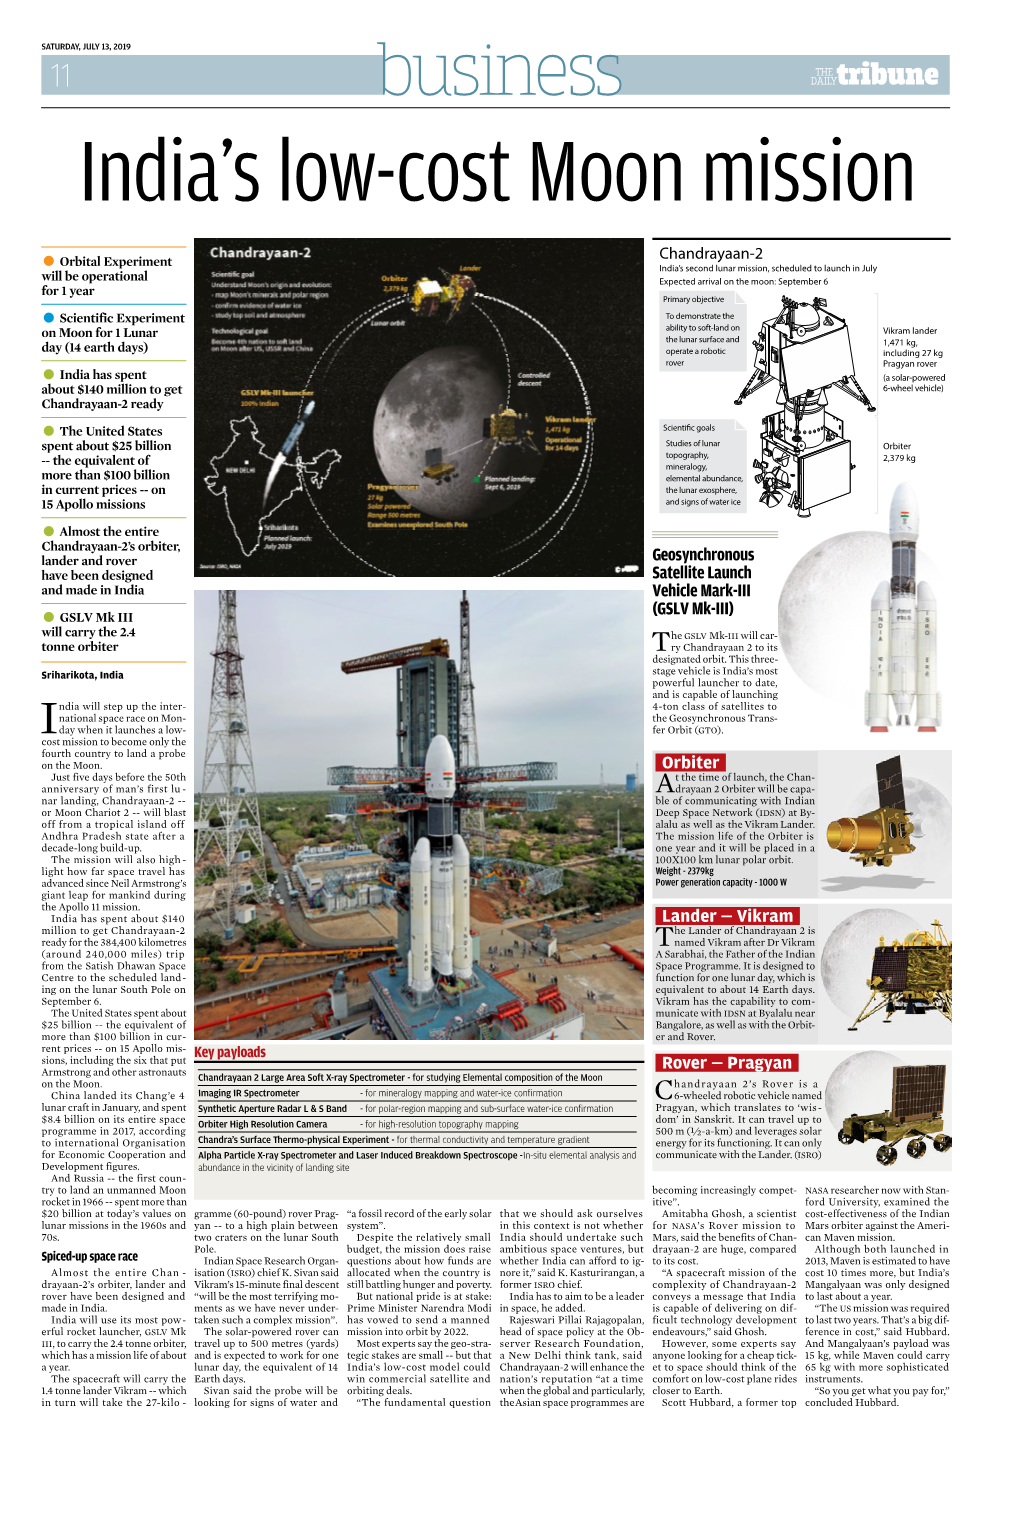 GSLV Mk-III) • GSLV Mk III Will Carry the 2.4 He GSLV Mk-III Will Car- Tonne Orbiter Try Chandrayaan 2 to Its Designated Orbit